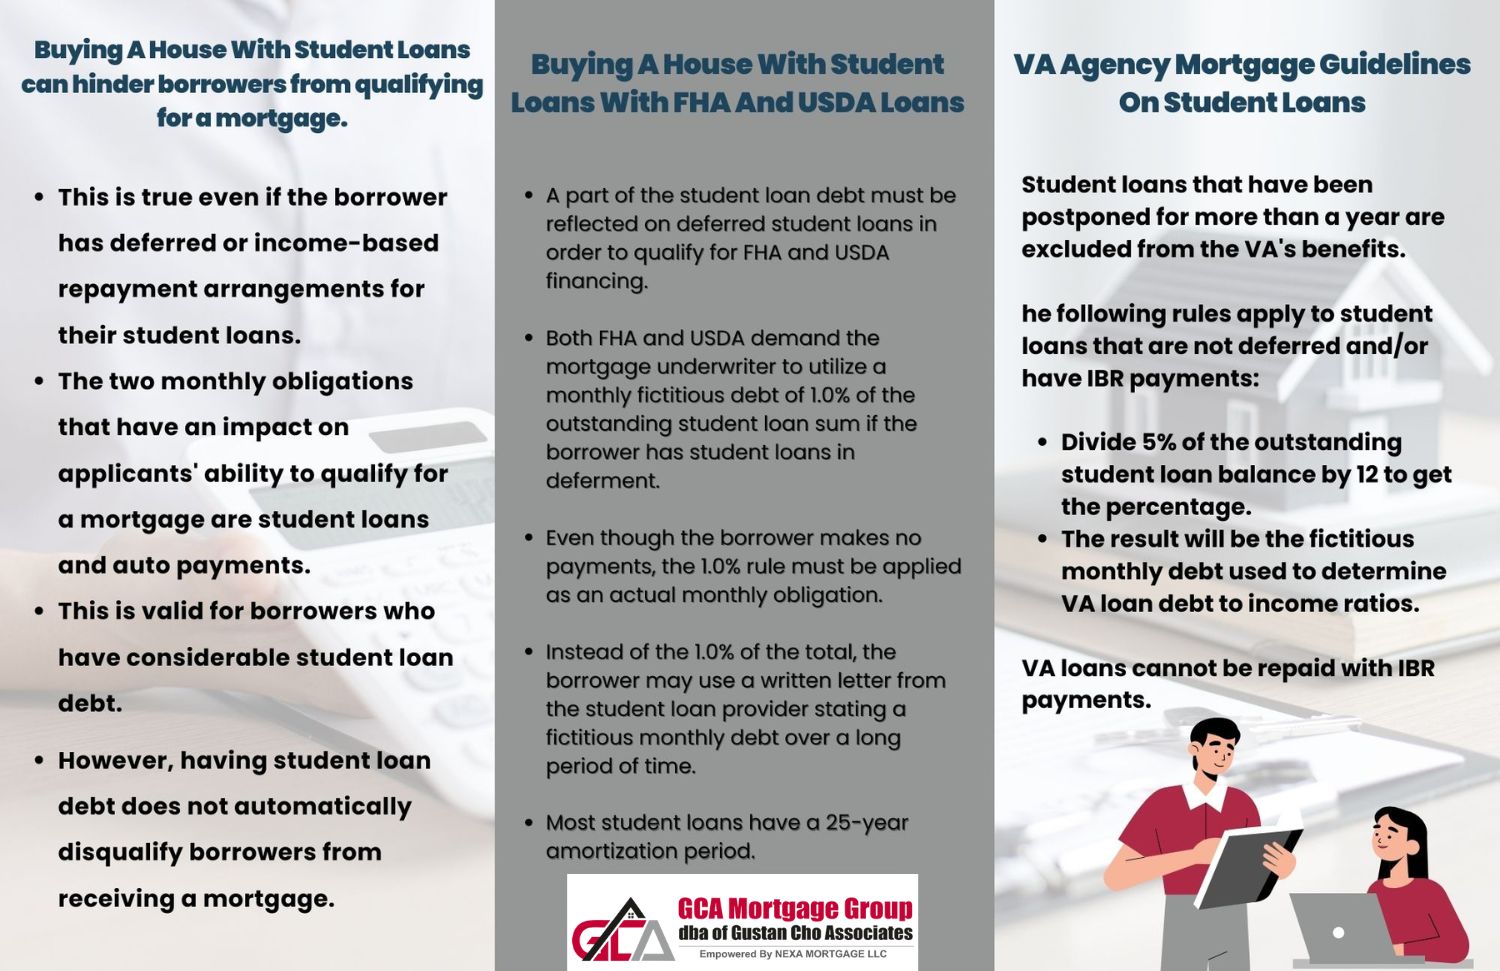 Buying A House With Student Loans And How It Affects Debt To Income Ratios